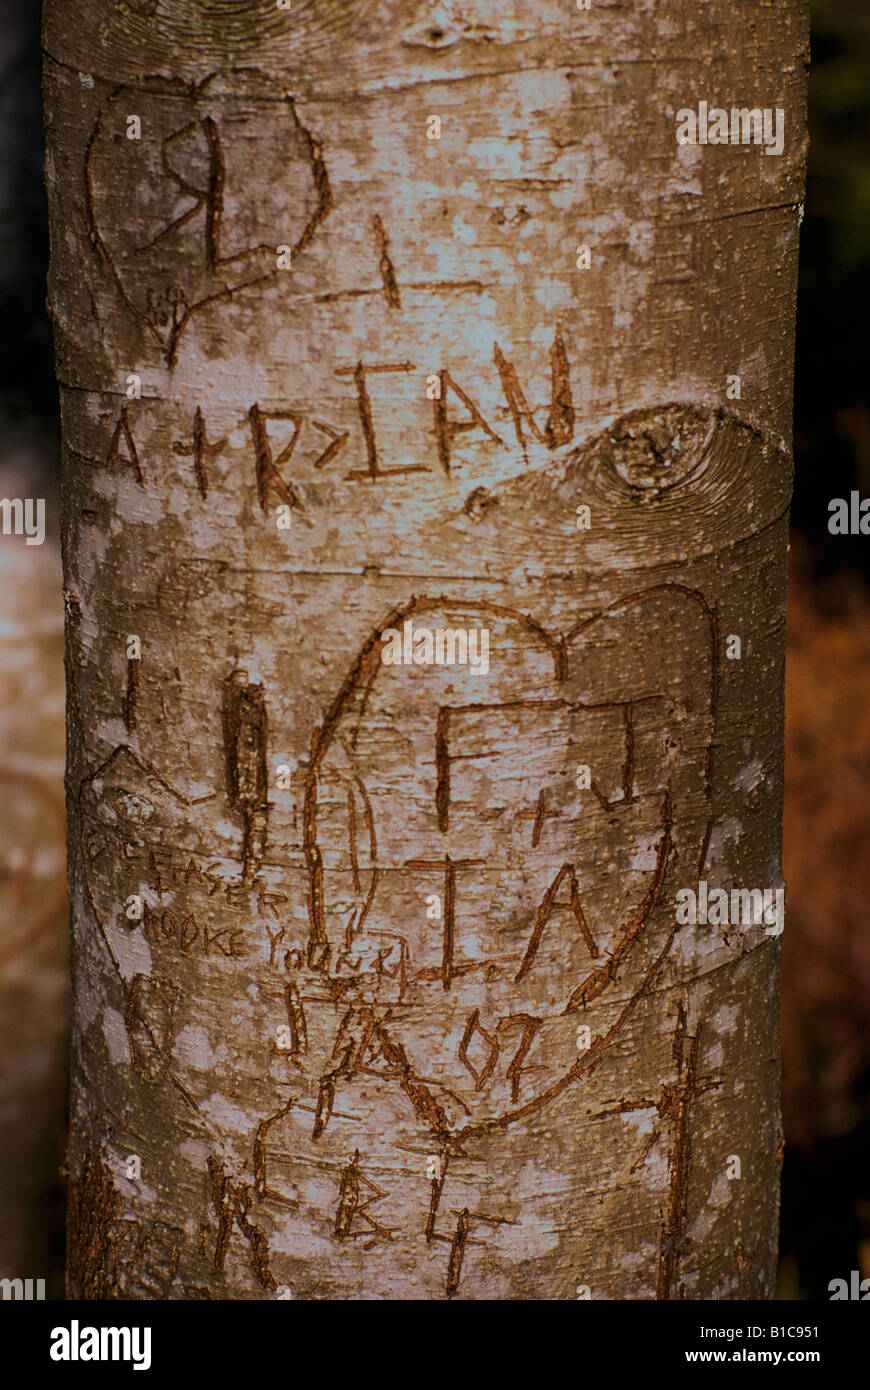 A Heart with Initials carved into the Bark of a Tree Trunk Stock Photo